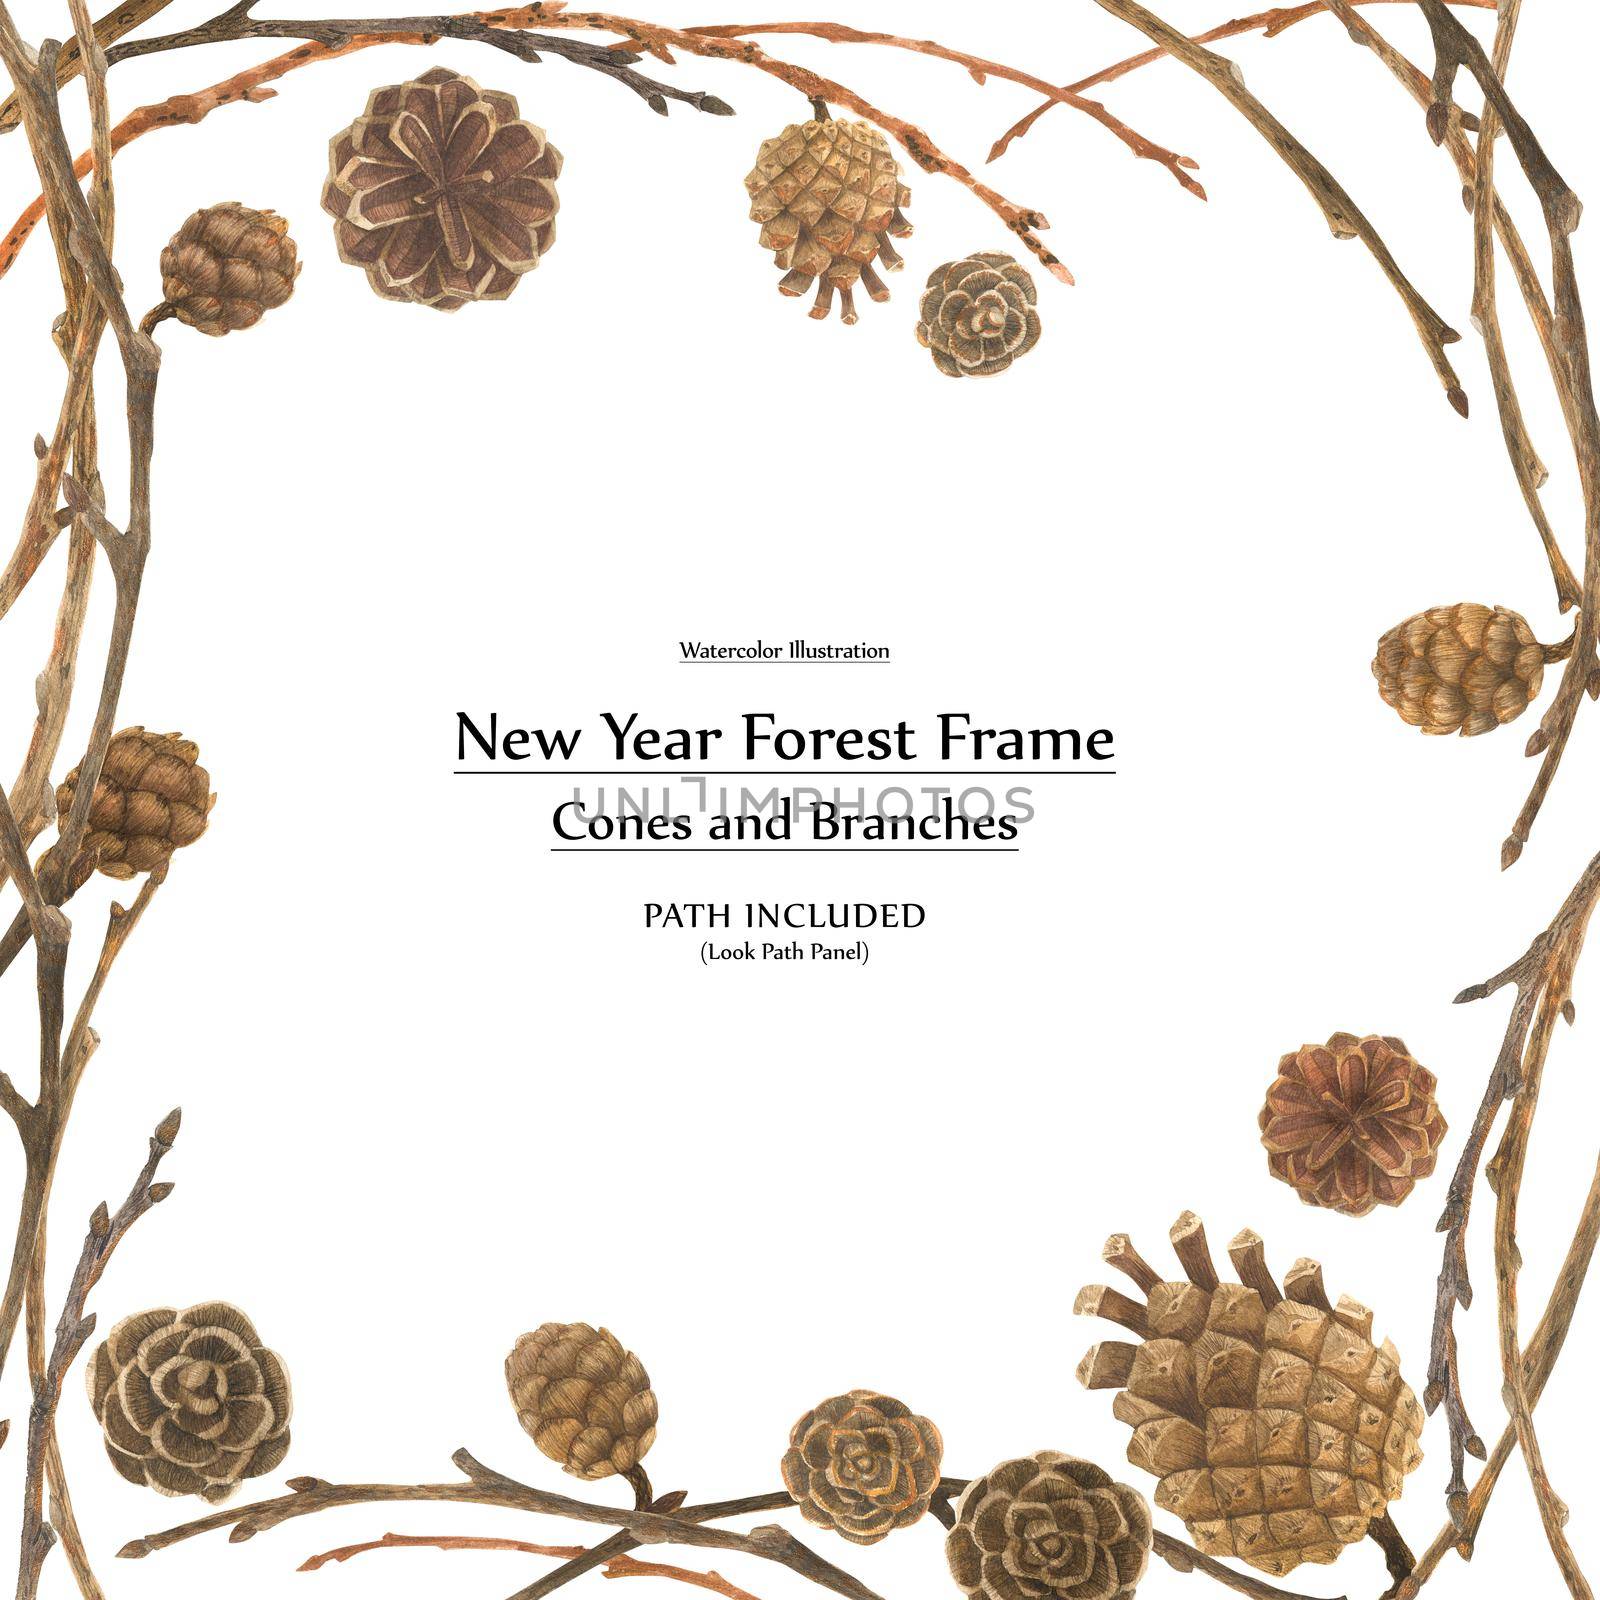 New year design by watercolor. Cones and branches square frame. Isolated, path included